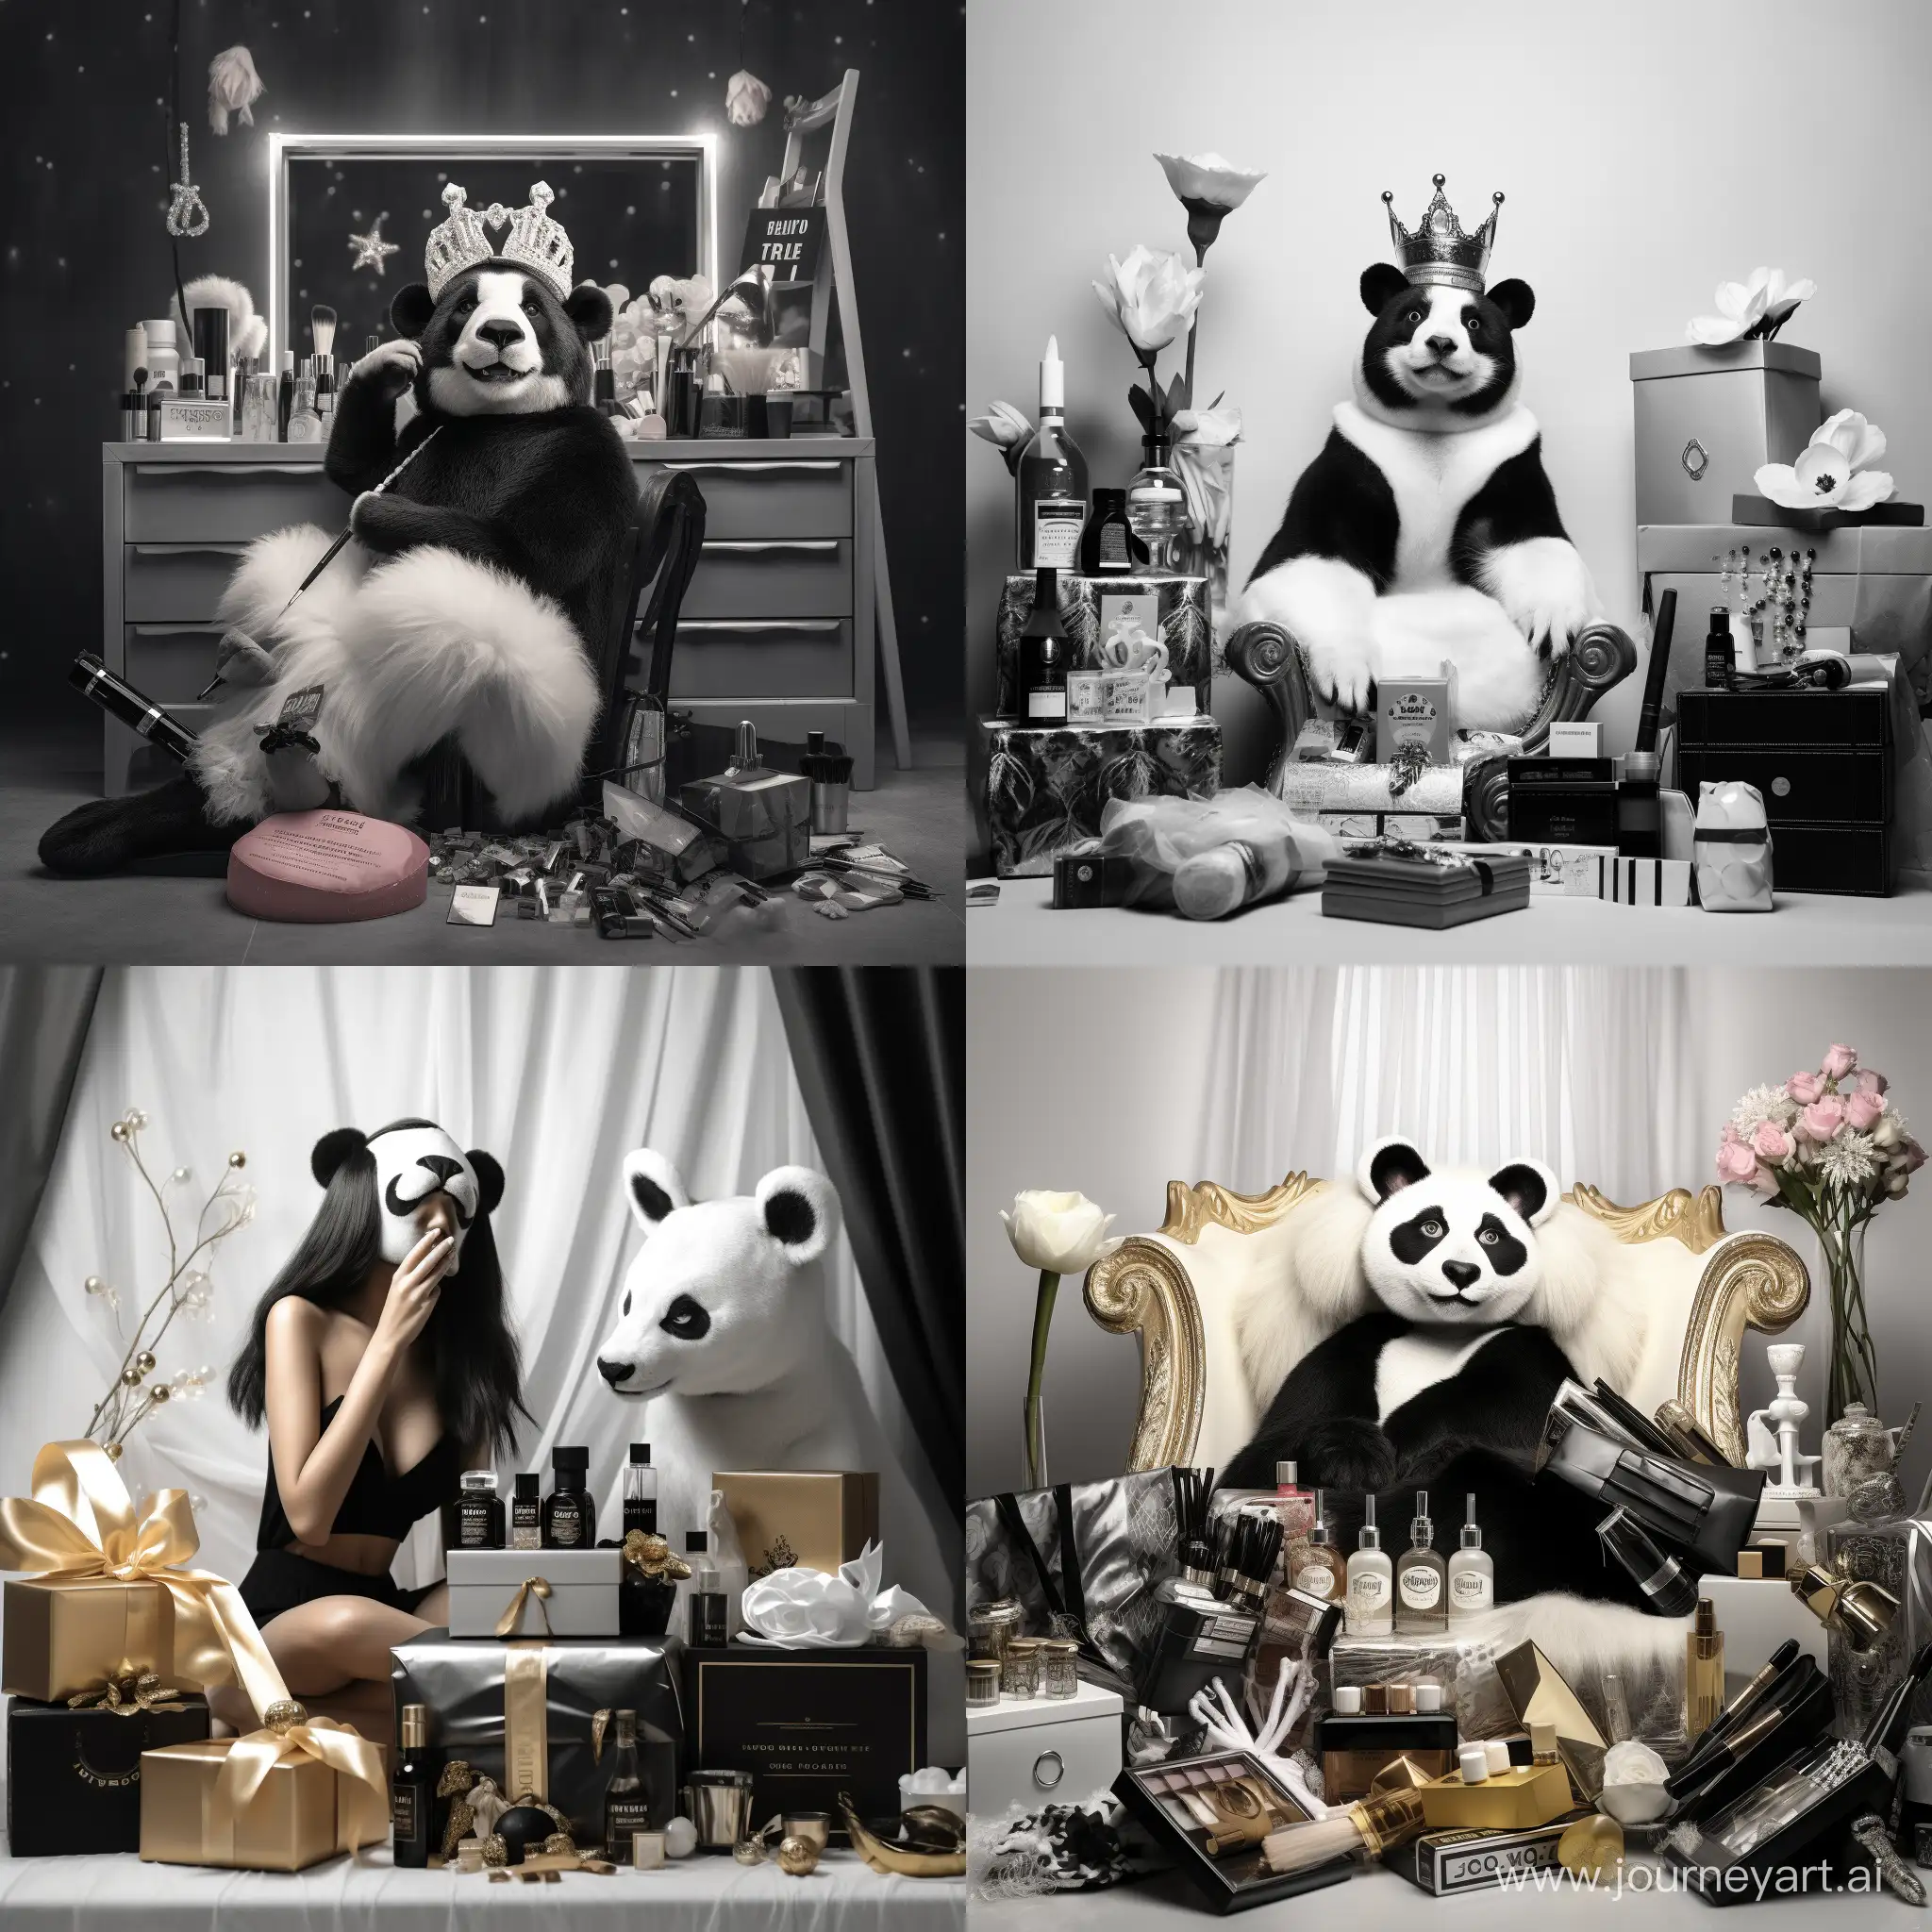 Create me an image photorialstic at eye level master shot of a black and white female panda.  She looks cute she is relaxed, smiling and happy inside the beauty salon, wearing a golden crown on her head. Next to her is abox of beauty products. 